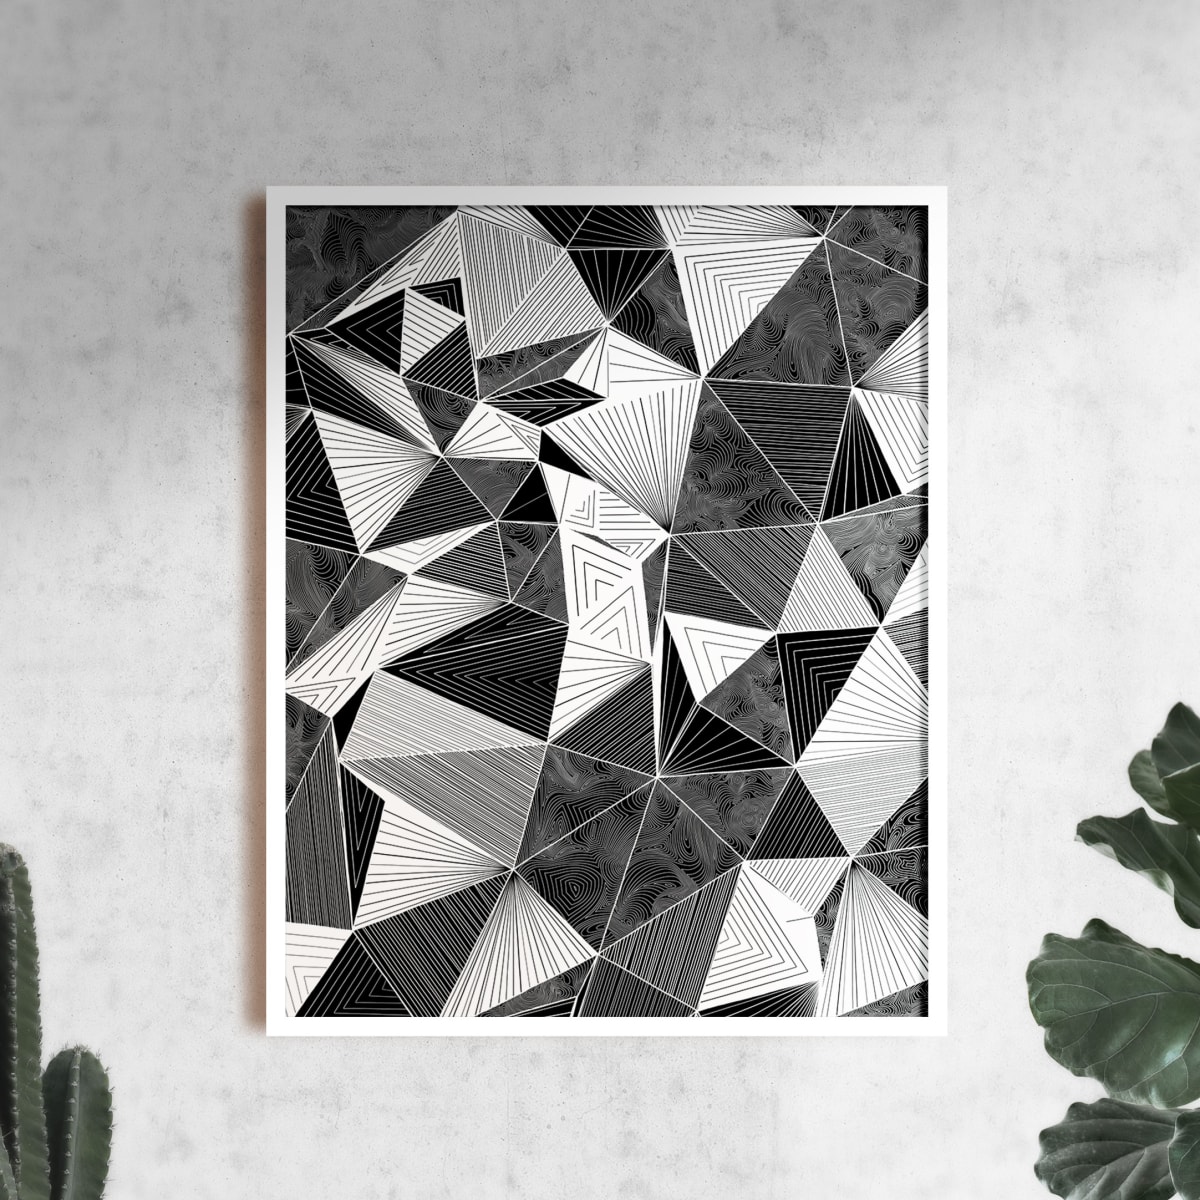 "Conscious Growth 097" Large One-of-a-Kind Print by Debbie Clapper  Image: Conscious Growth Print 097, a black and white one of a kind archival modern art print